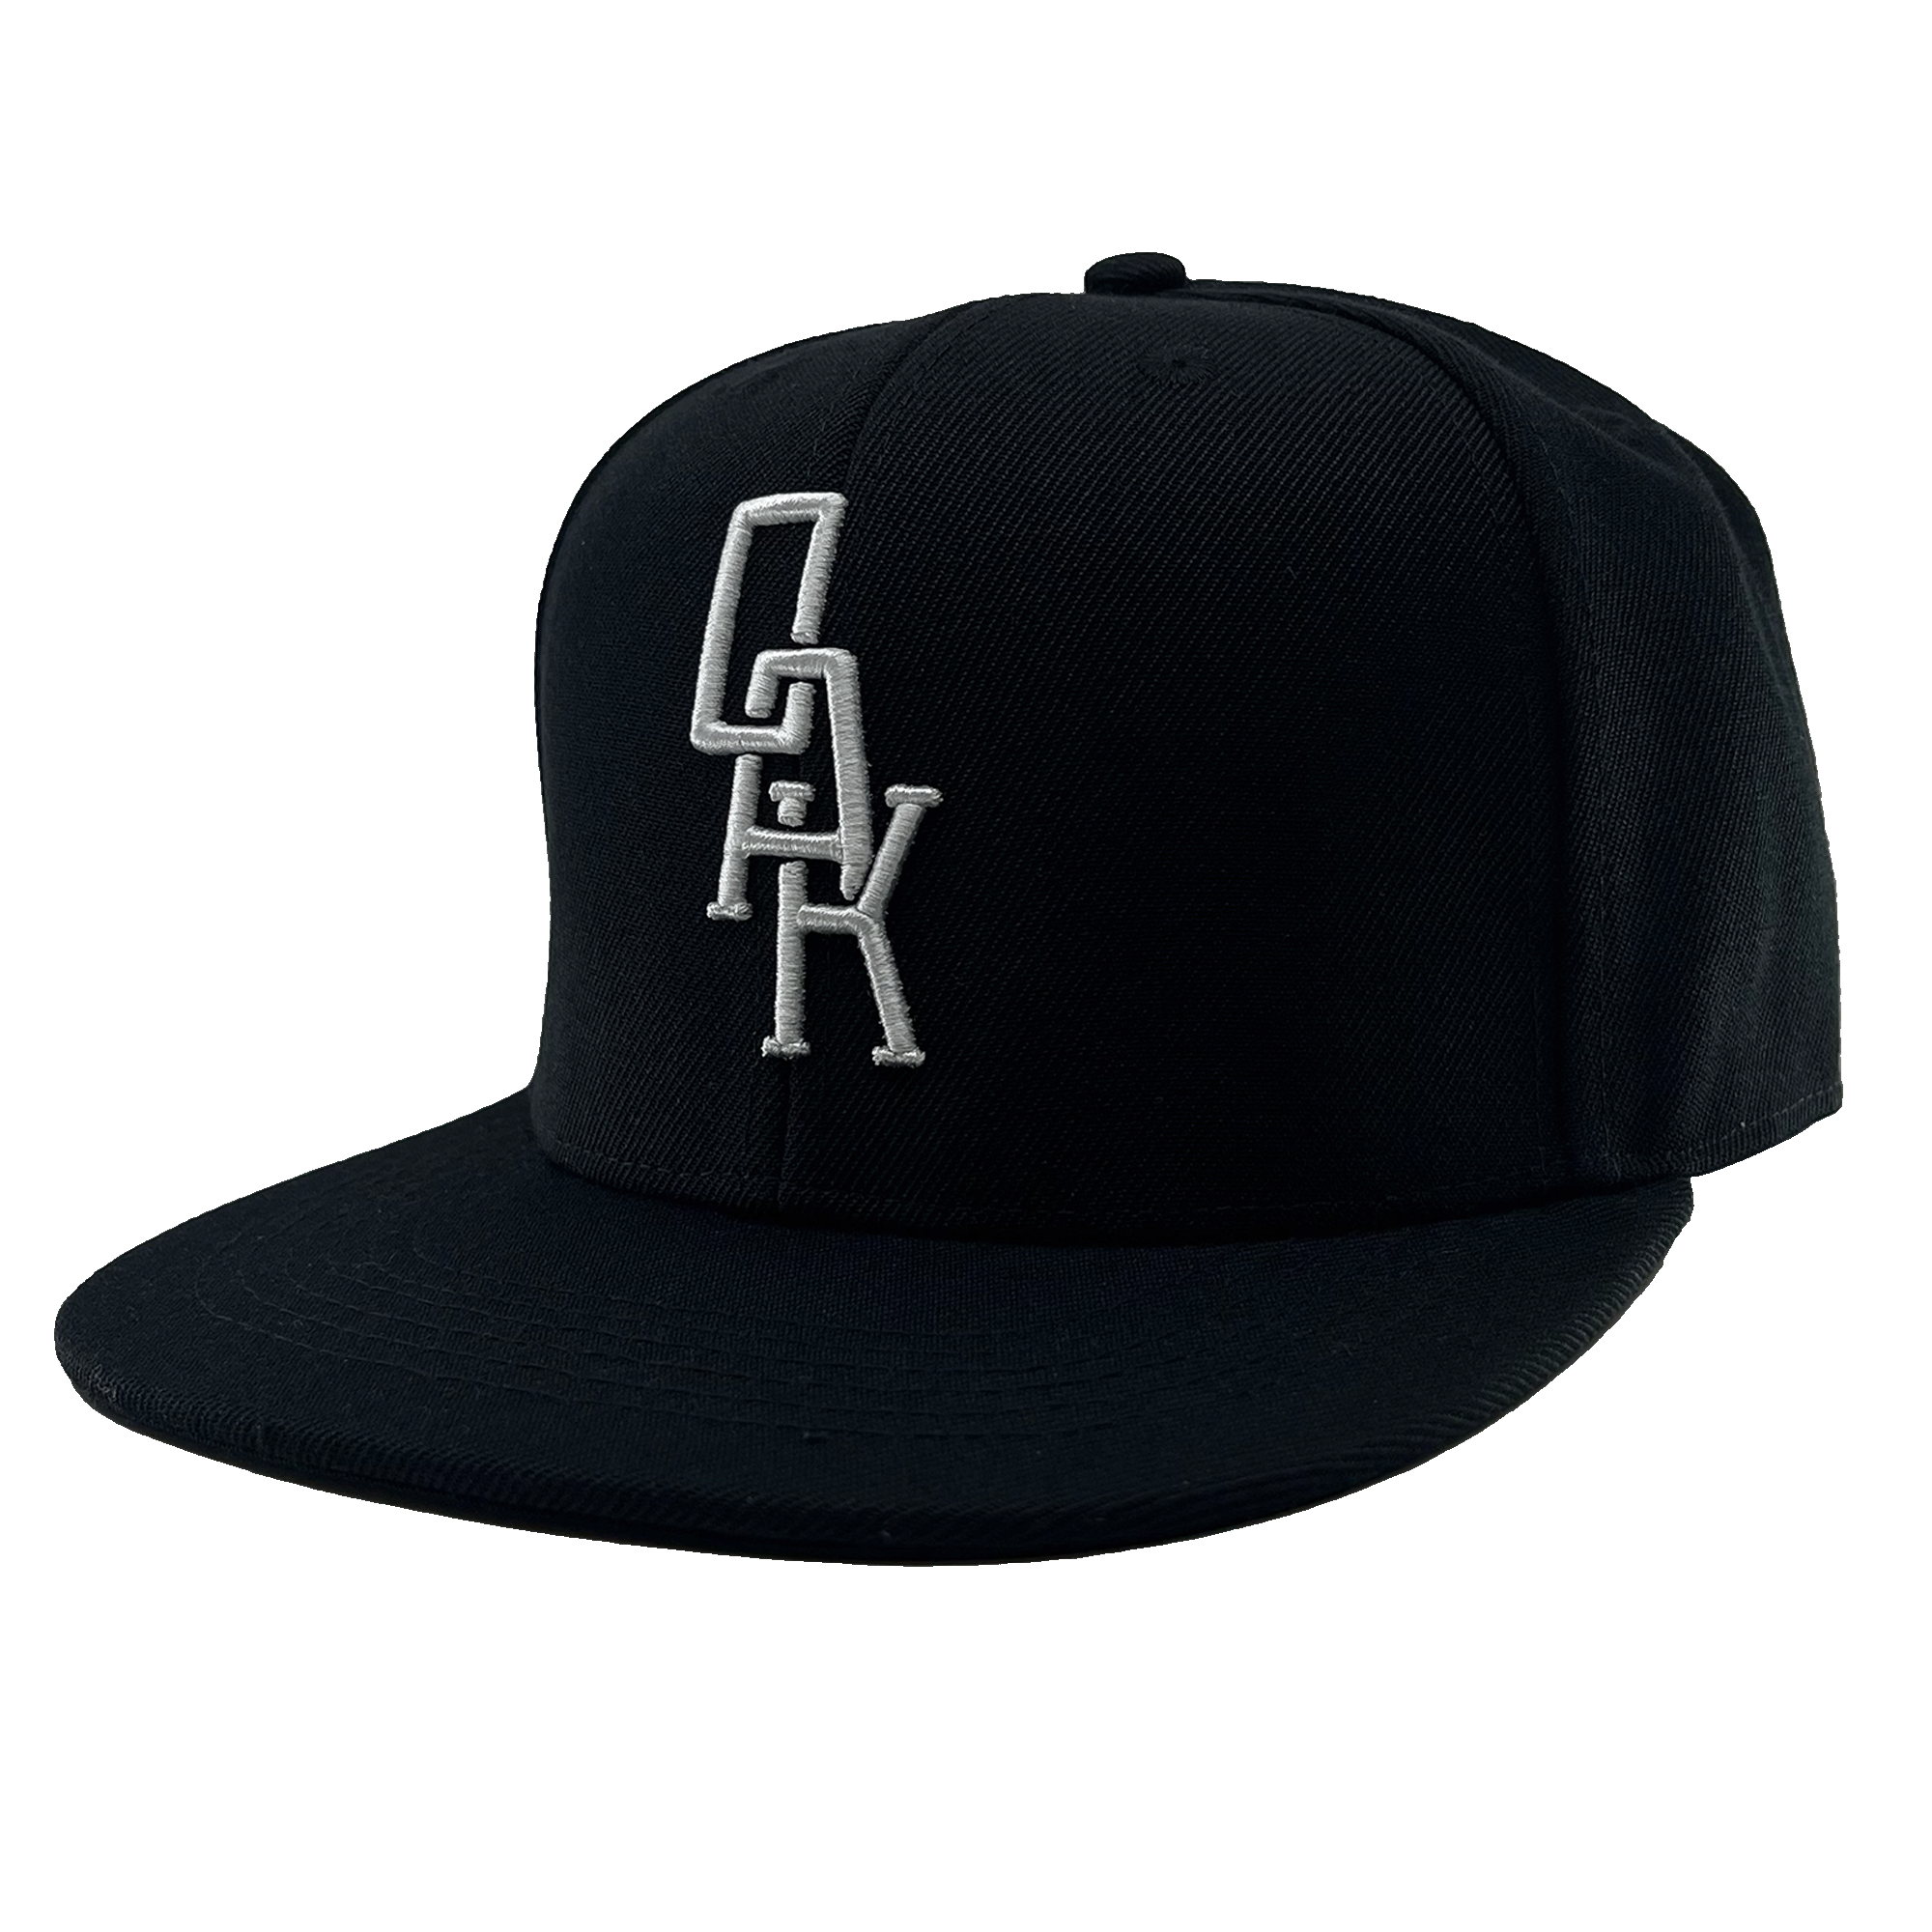 Angled side view of a black hat with a black bill and white embroidered OAK logo on the front crown.